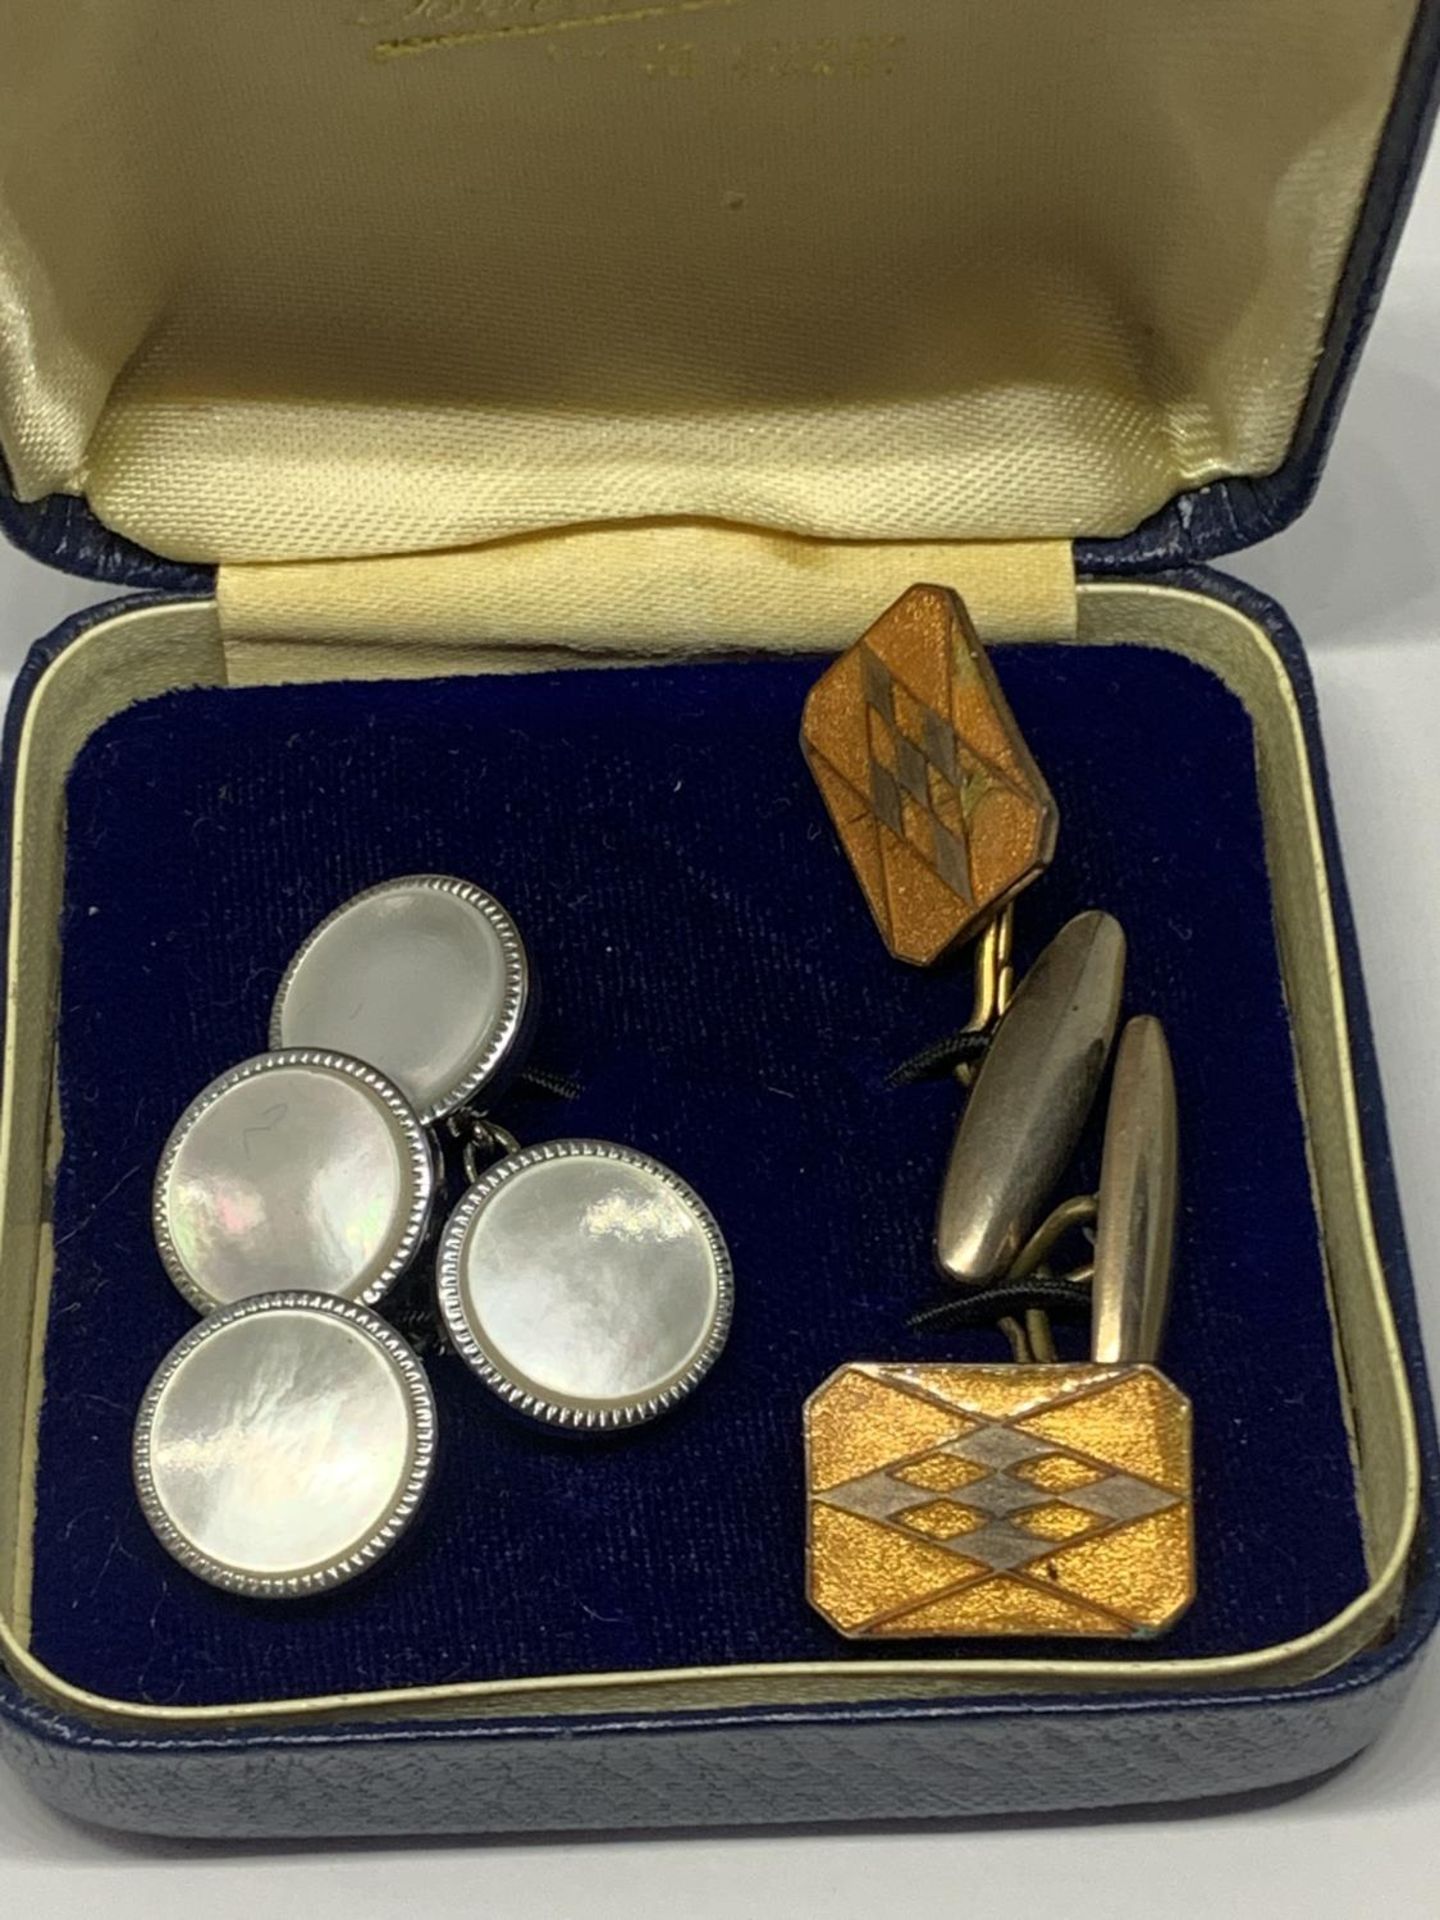 TWO PAIRS OF CUFFLINKS IN A PRESENTATION BOX